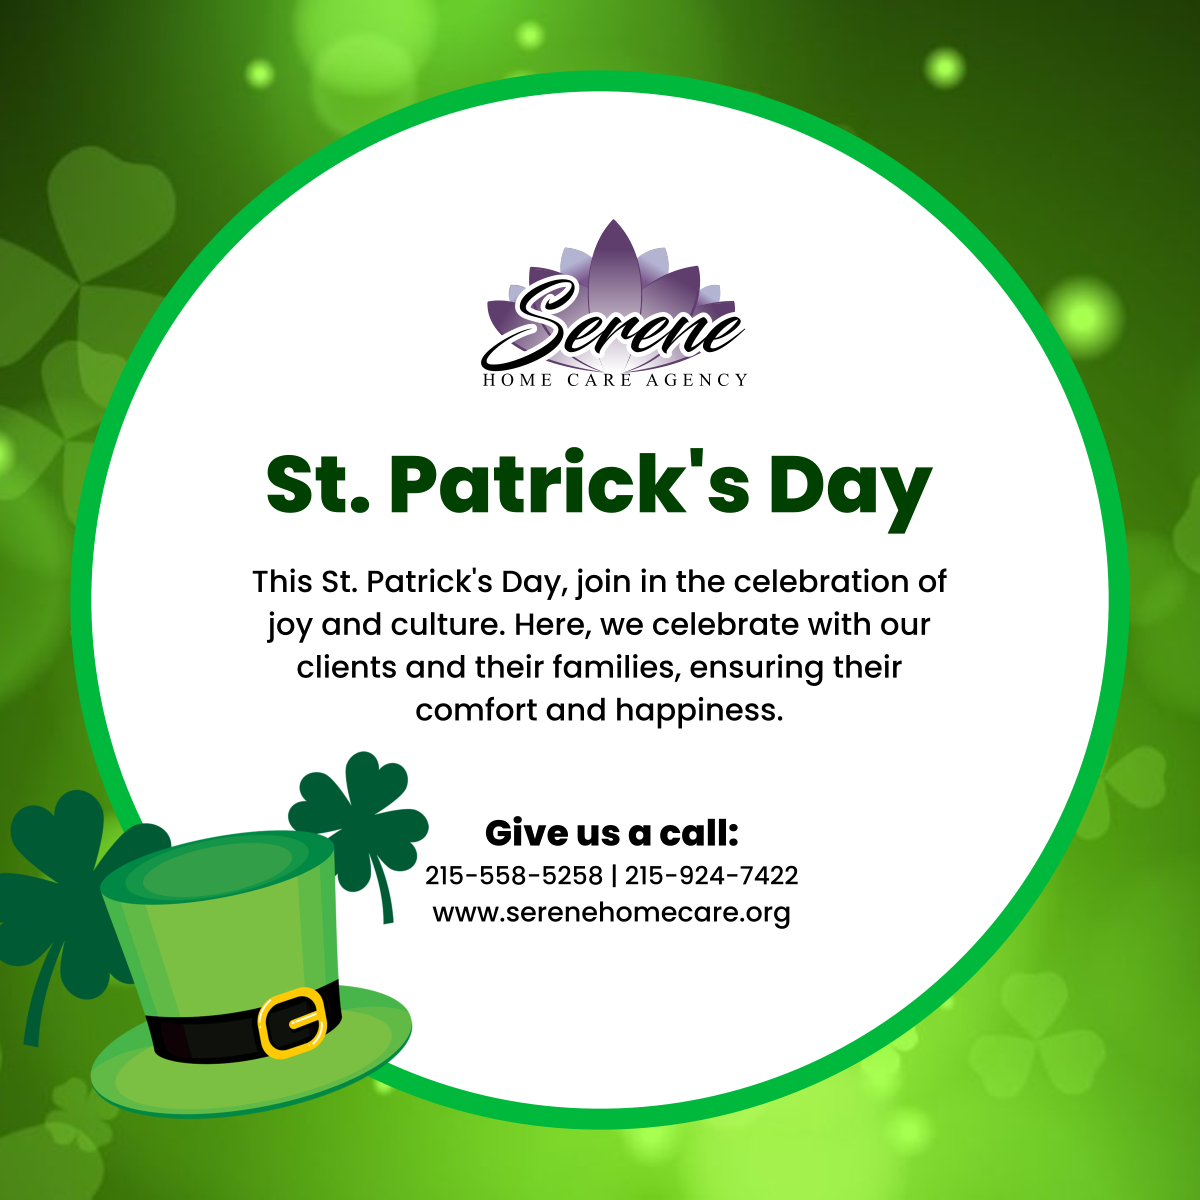 St. Patrick's Day is a time to celebrate and be joyous. Join us as we embrace the festive spirit and make this day special for our clients and their loved ones. Wishing everyone a happy and vibrant St. Patrick's Day! 

#Homecare #Philadelphia #StPatricksDay #FestiveCelebration